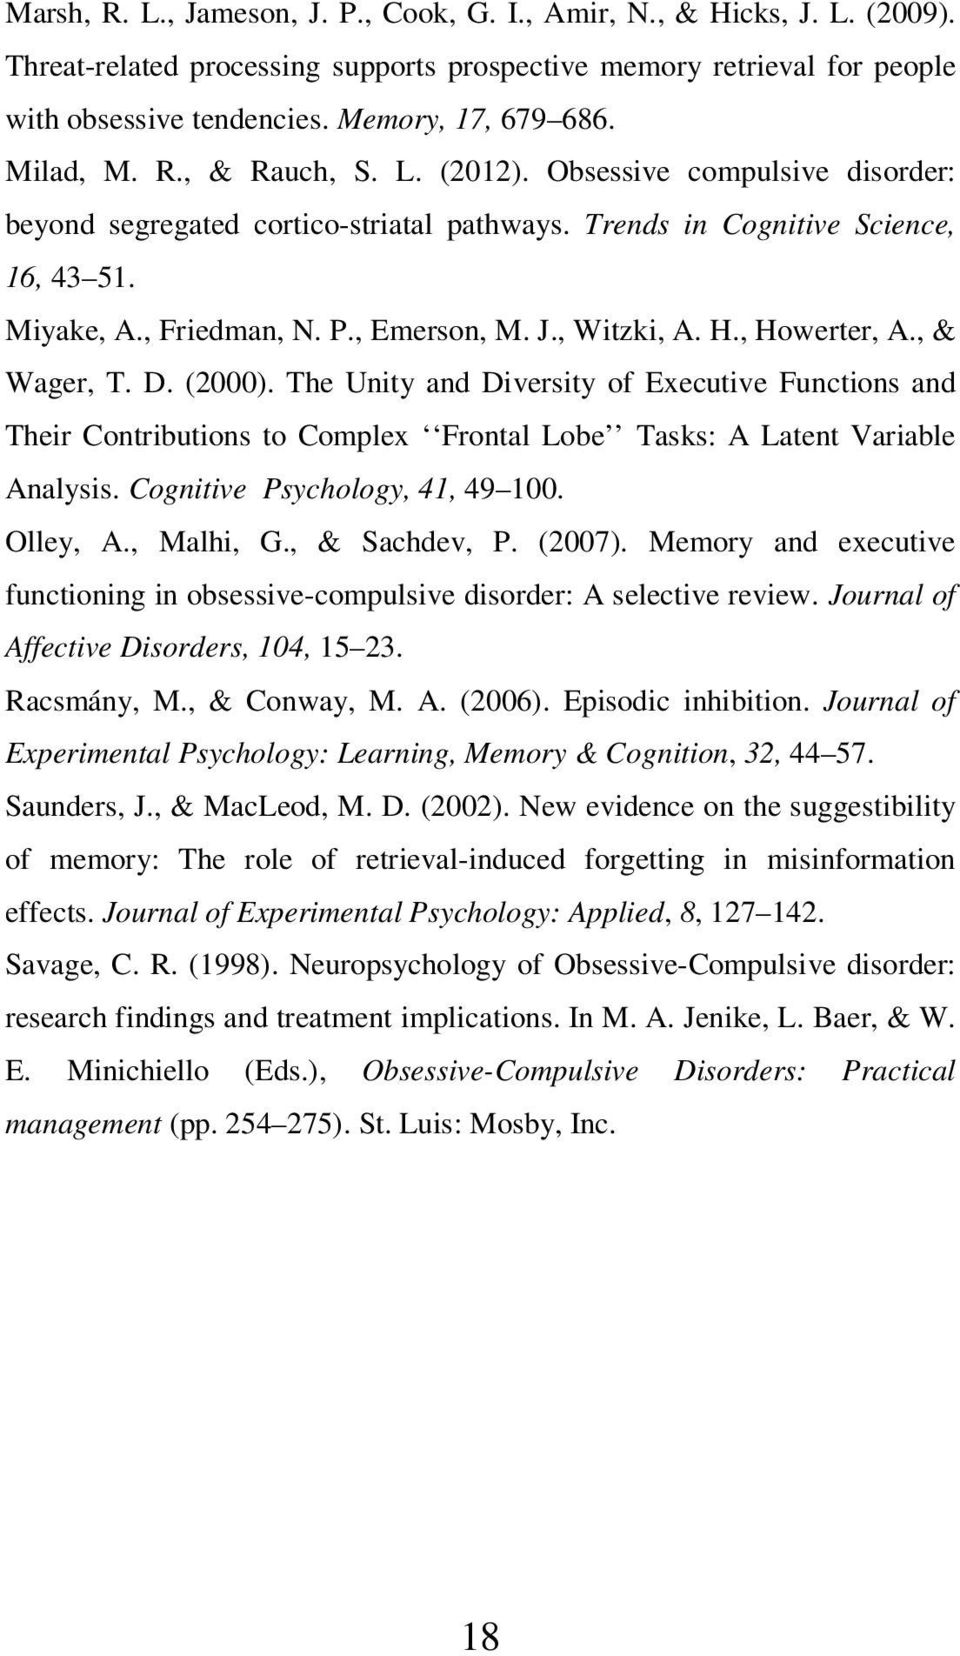 , Witzki, A. H., Howerter, A., & Wager, T. D. (2000). The Unity and Diversity of Executive Functions and Their Contributions to Complex Frontal Lobe Tasks: A Latent Variable Analysis.